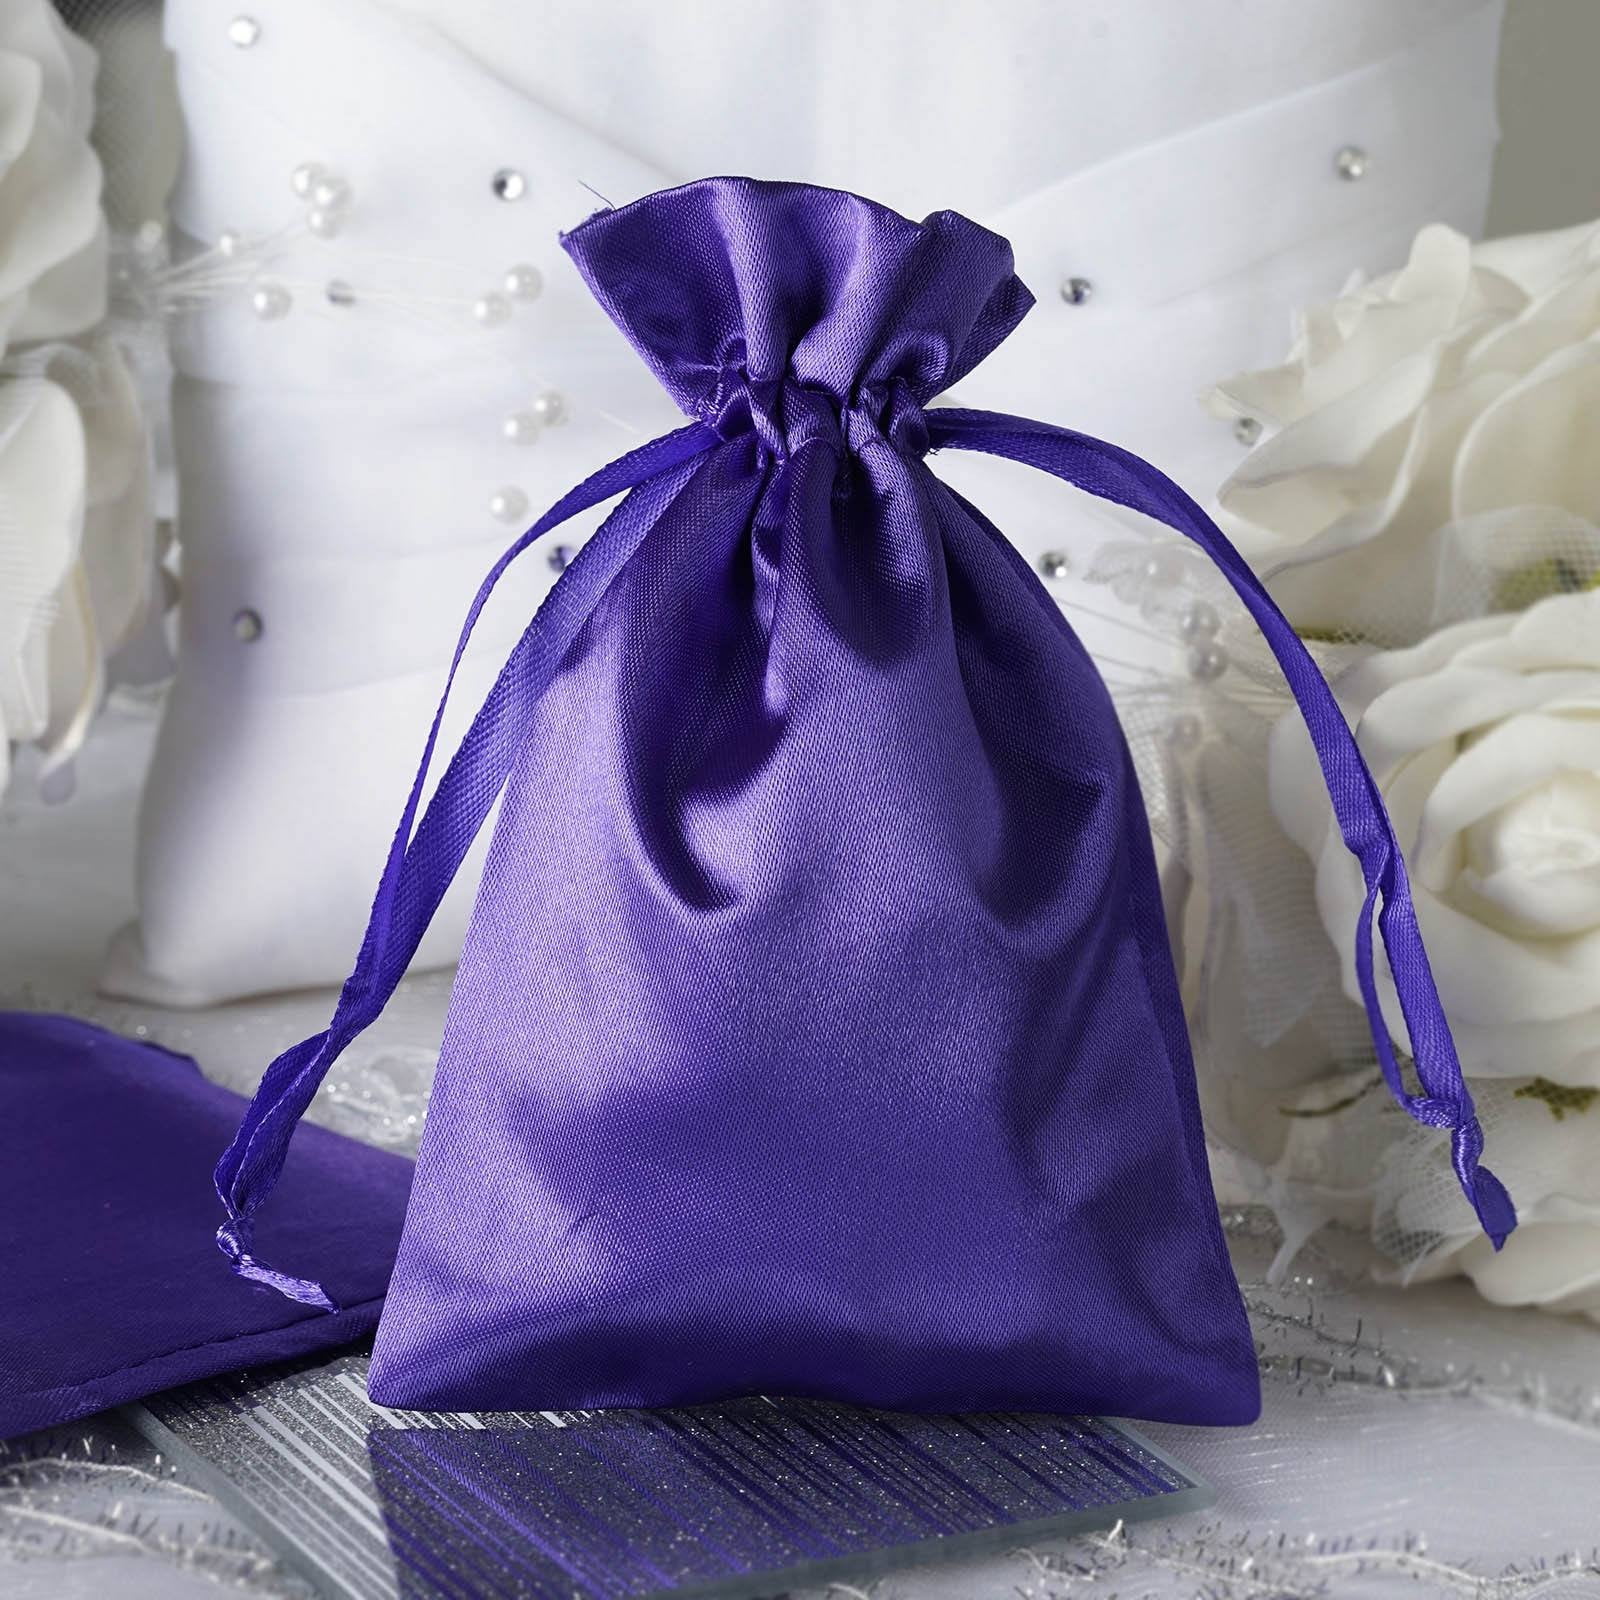 12PCS Satin Gift Bag Drawstring Pouch Wedding Favors Jewelry Gift Bags 6"x 9" 